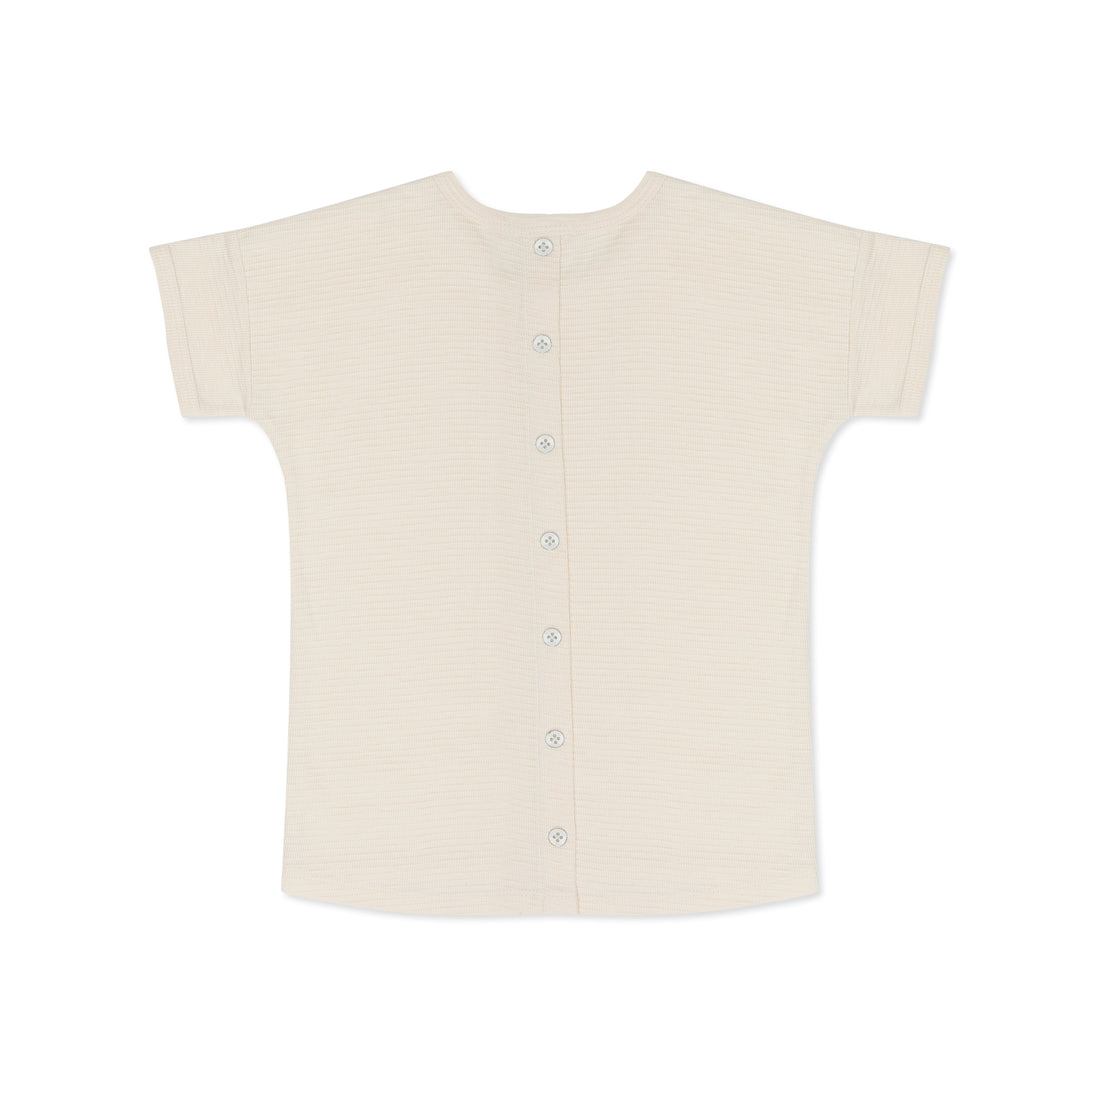 Phil and phae - textured button back tee - buttercream